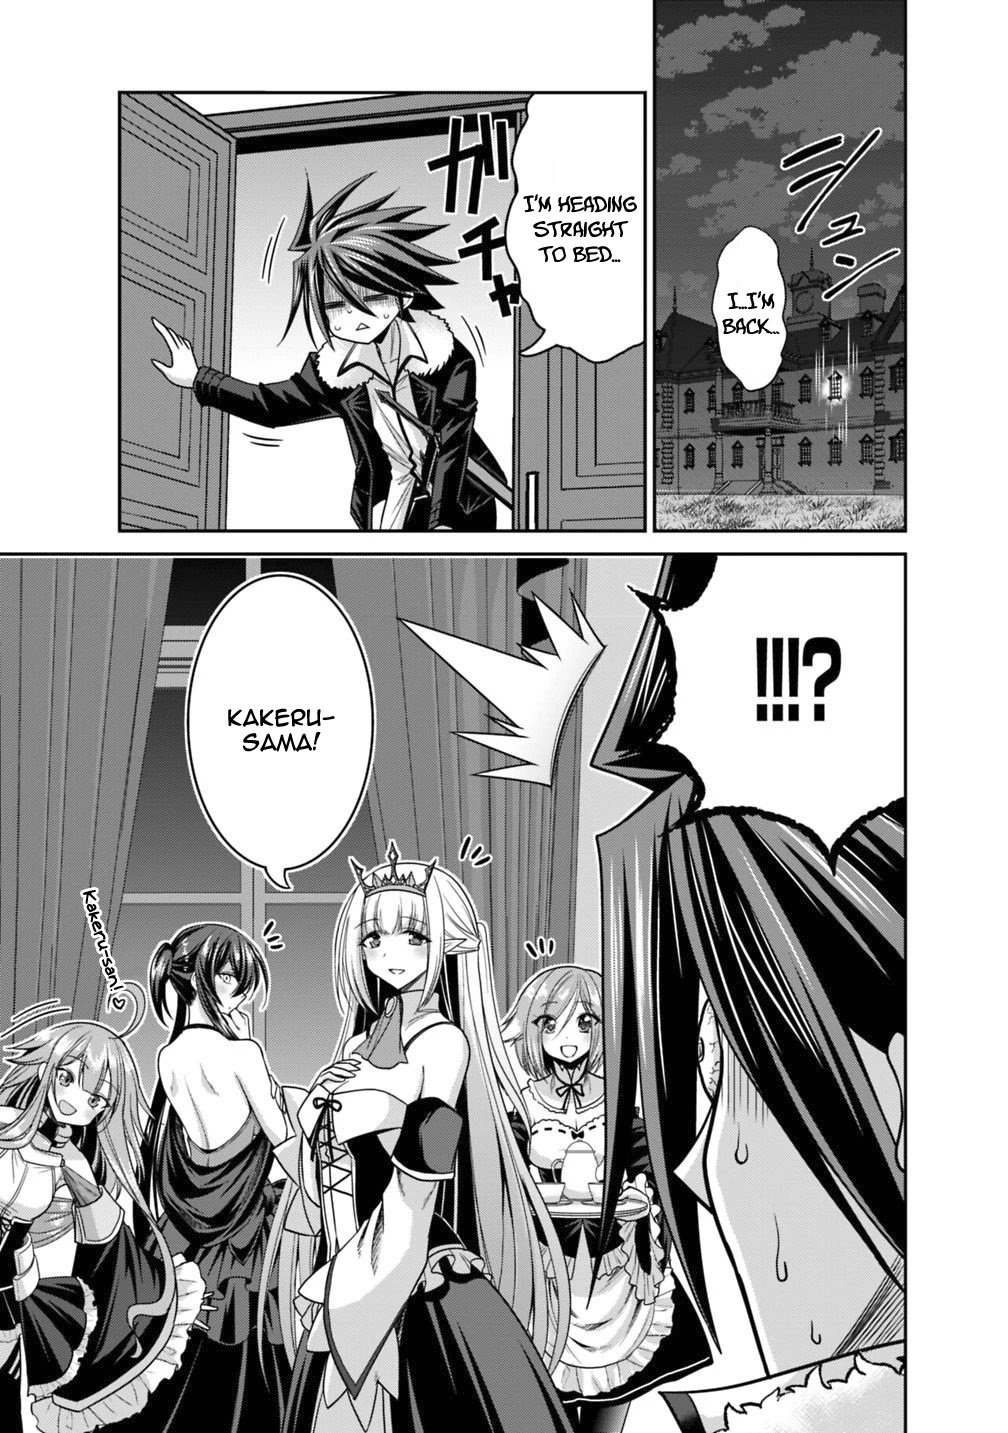 Kujibiki Tokushou Musou Harem-Ken Chapter 13.1 - 13.2: Unstoppable Excitement! Even That Power Got Multiplied By 777!? Part I - Picture 3